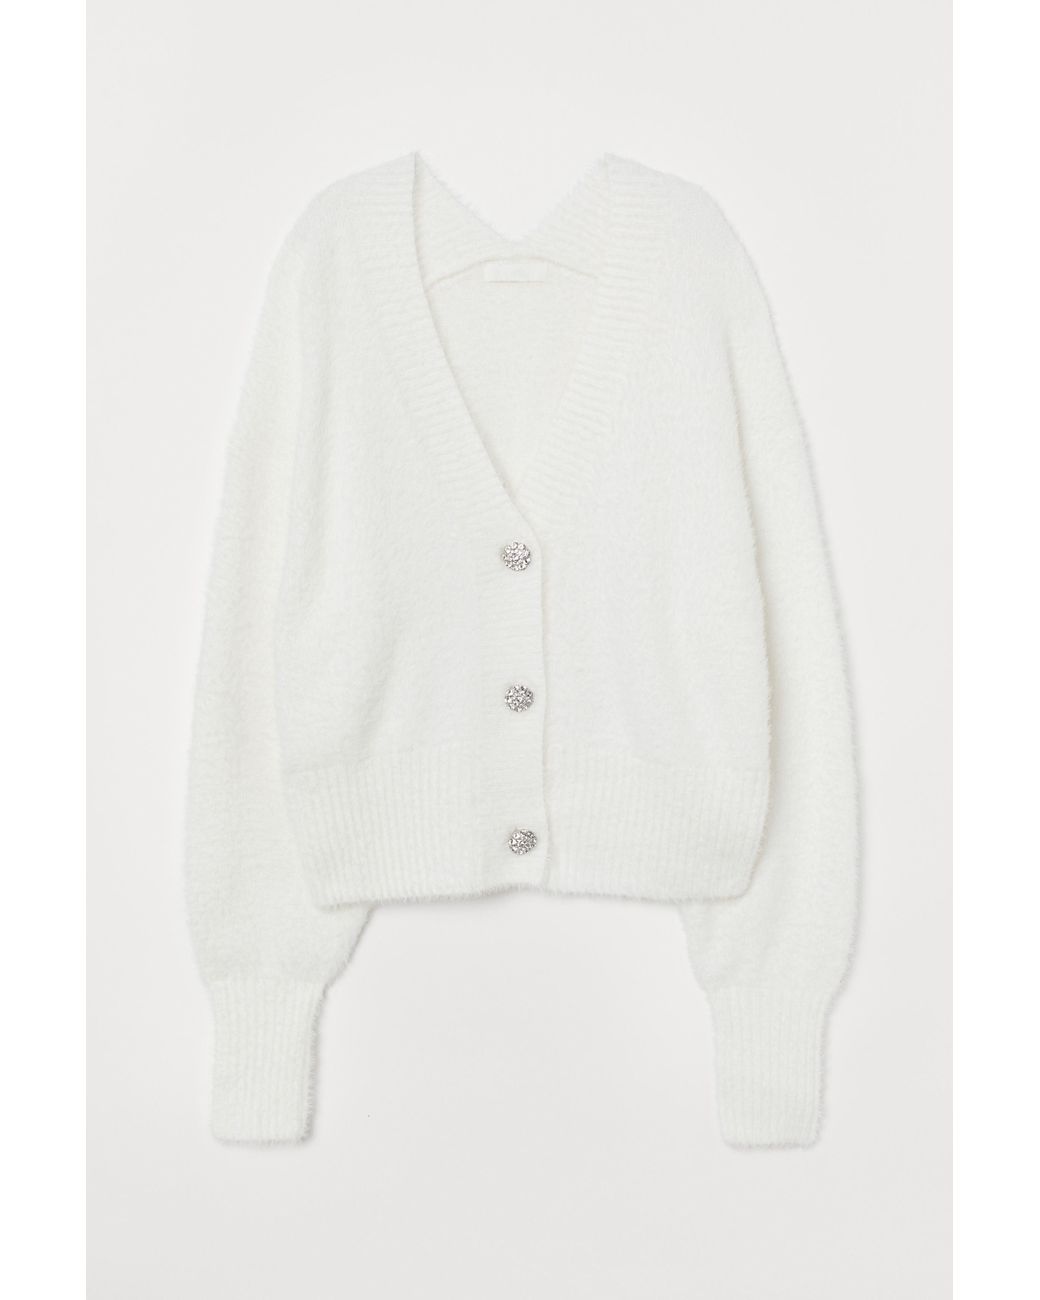 H&M Sparkly-button Fluffy Cardigan in White | Lyst